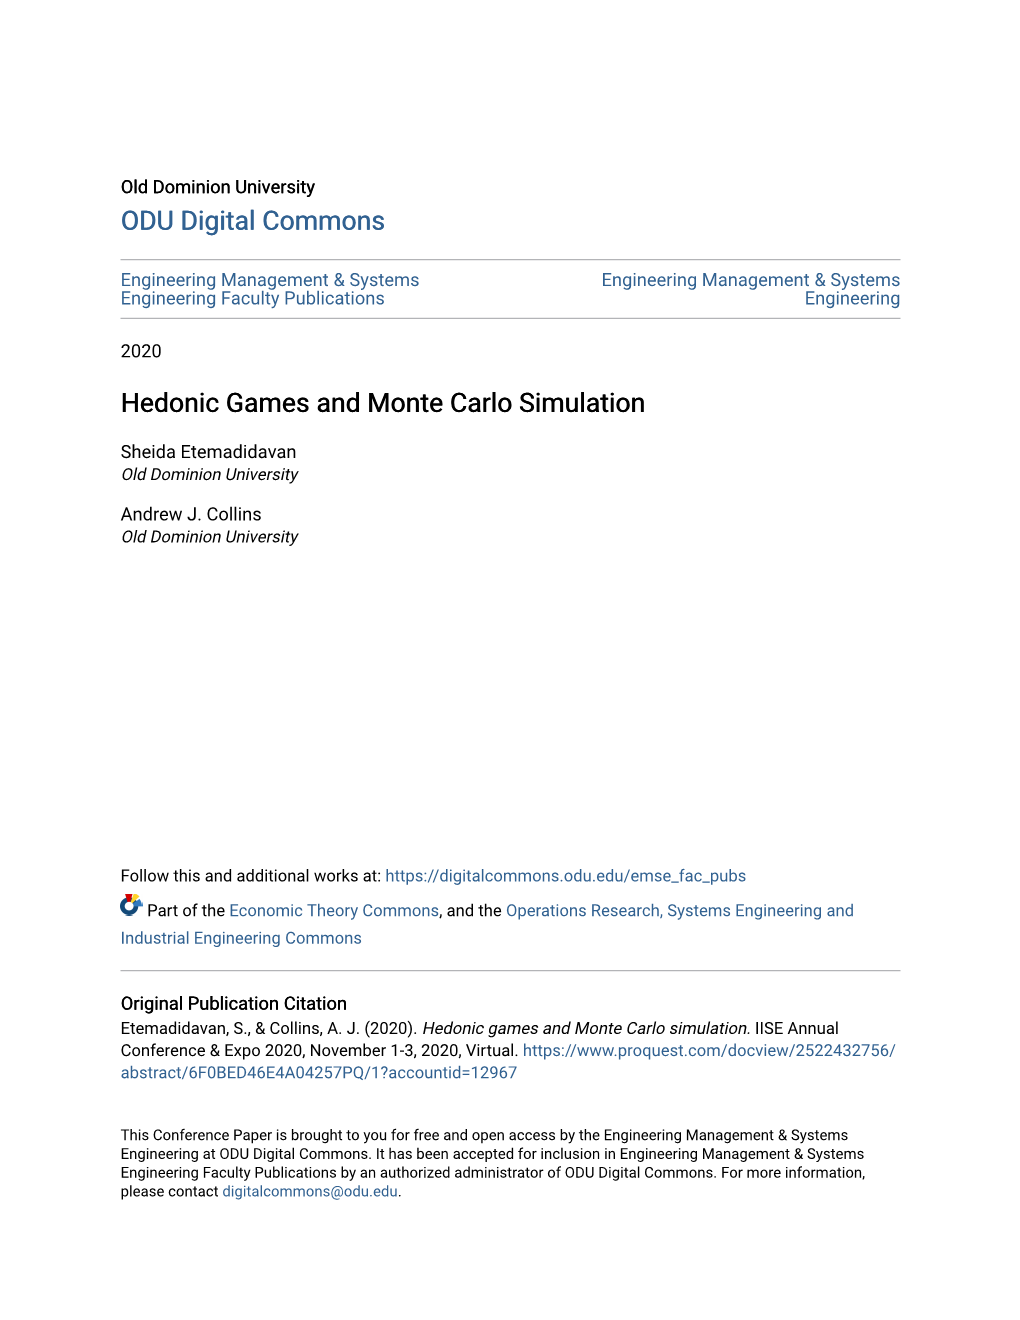 Hedonic Games and Monte Carlo Simulation